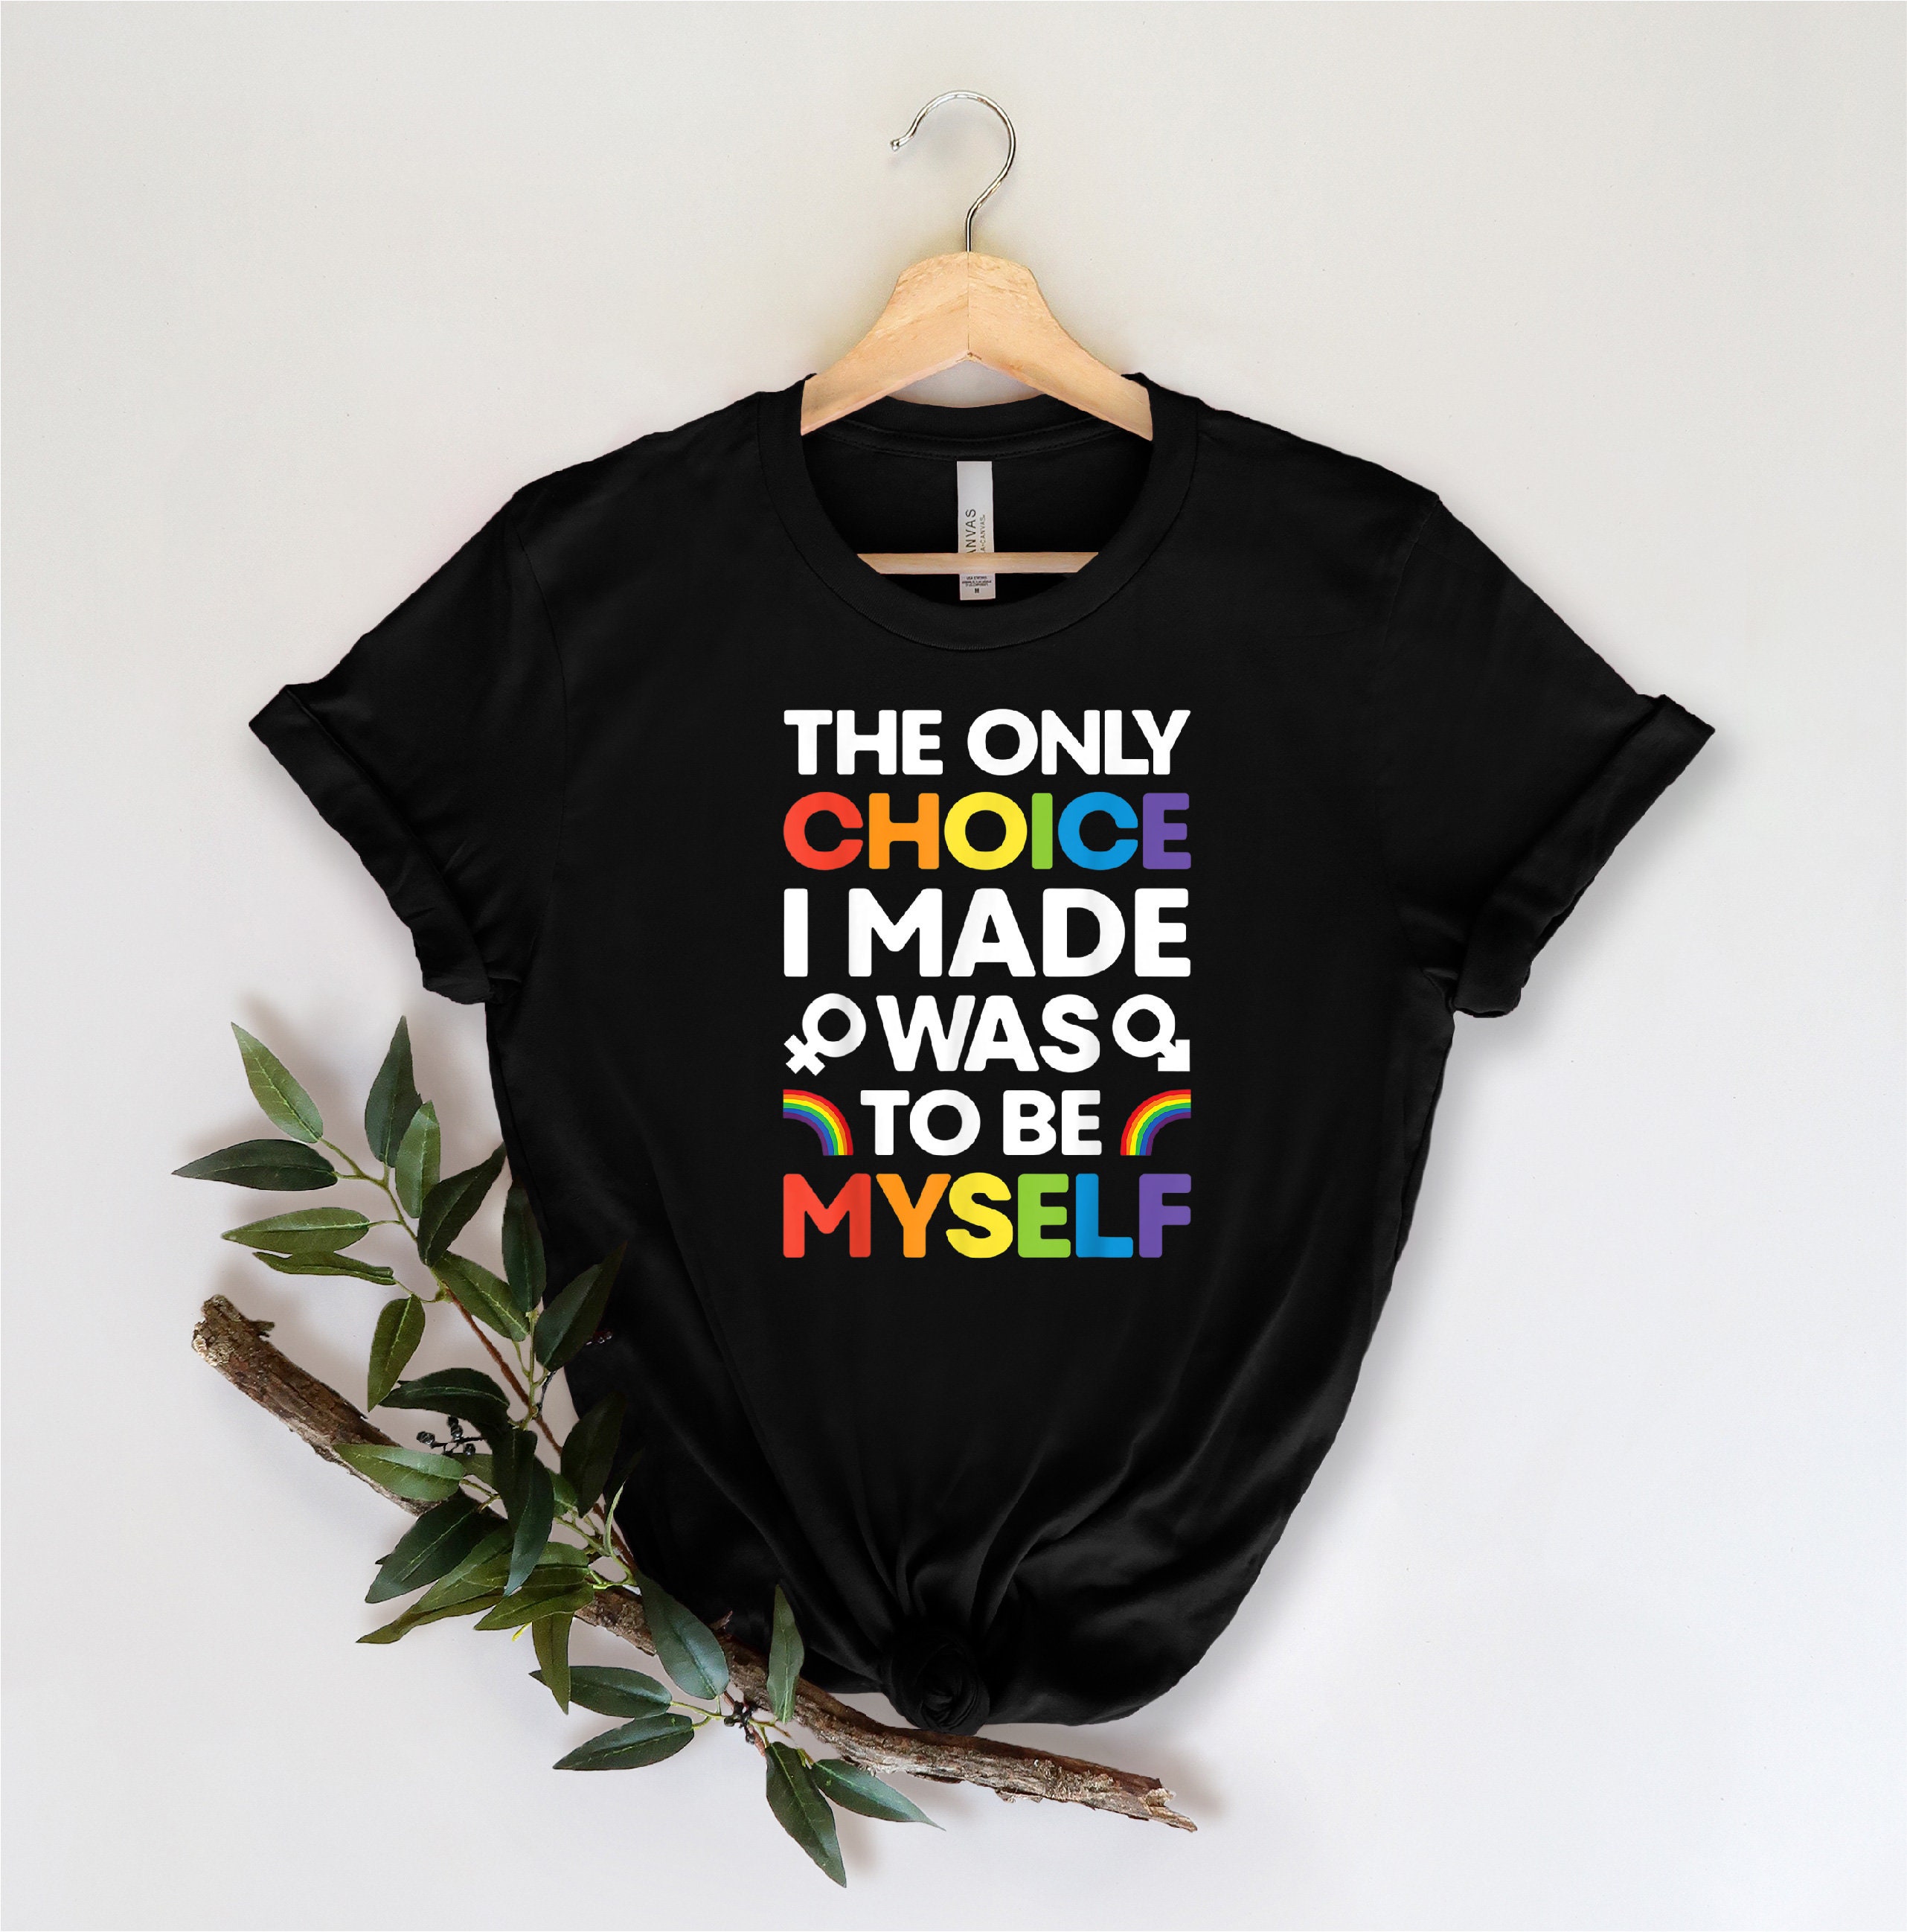 The Only Choice I Made Was To Be Myself Shirt Human Rights | Etsy